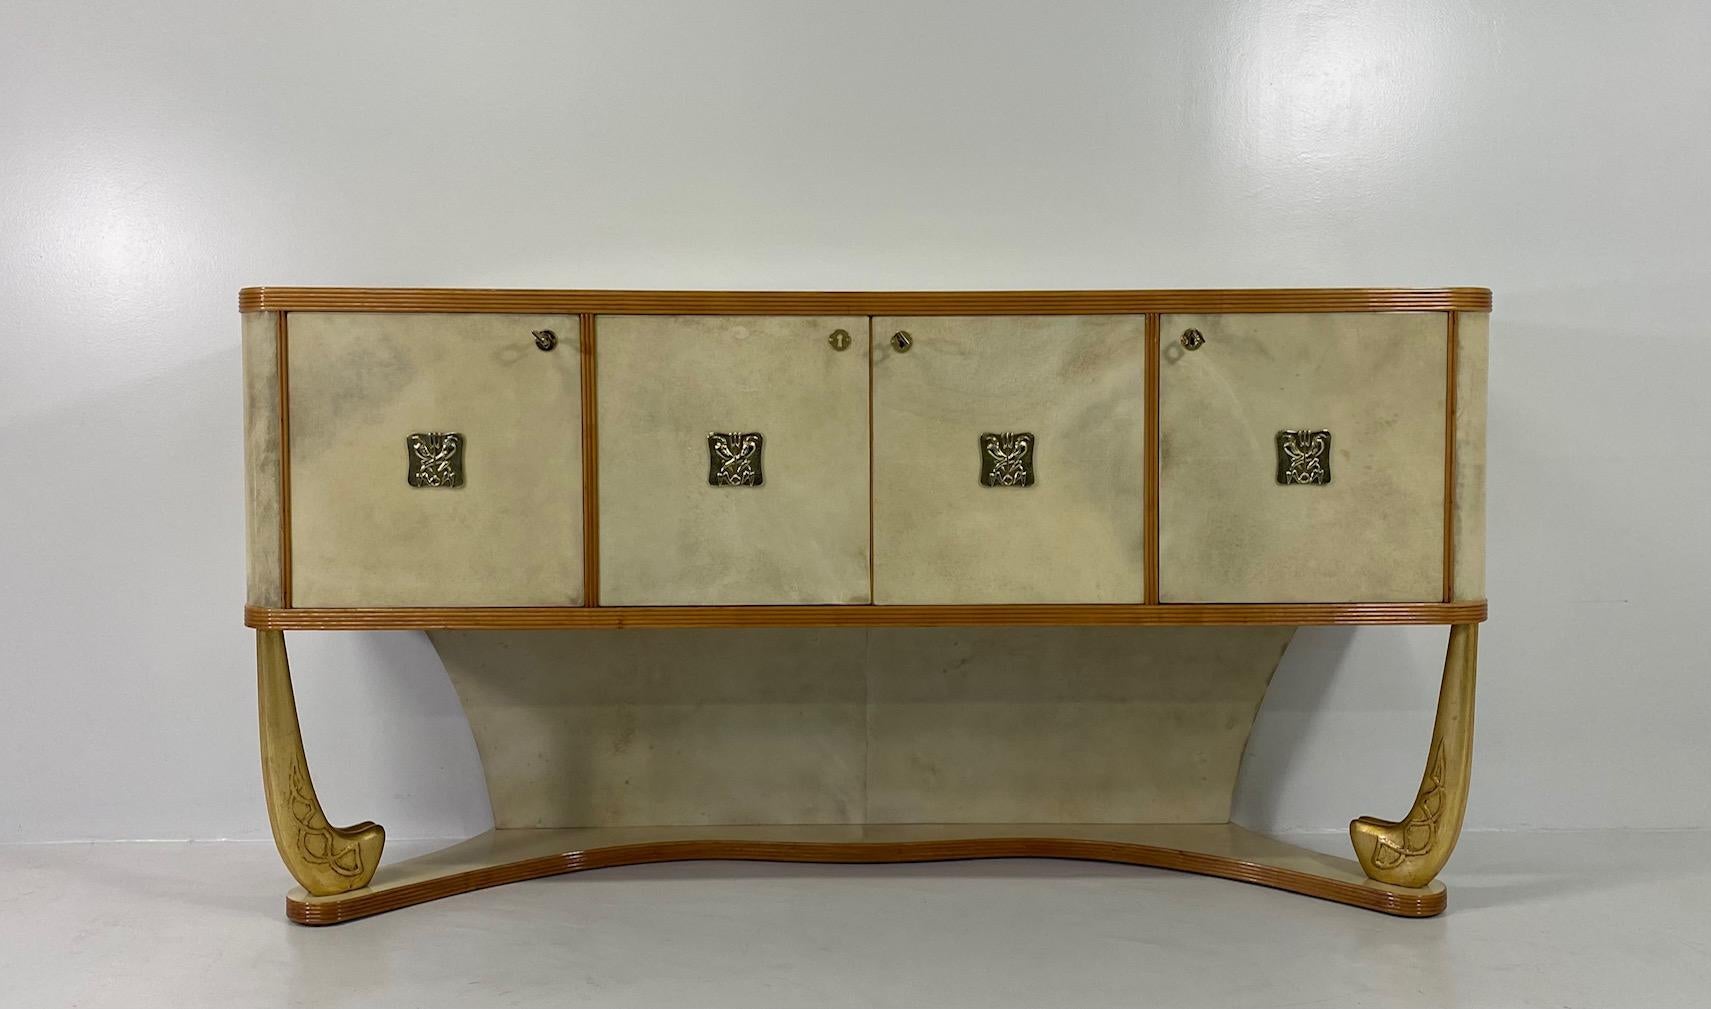 This Art Deco sideboard was produced in Italy, more precisely in Torino on a design by Pierluigi colli in the 1930s. 
The top, the background of the base, the doors and the laterals are in fine parchment, which is framed by maple profiles. The